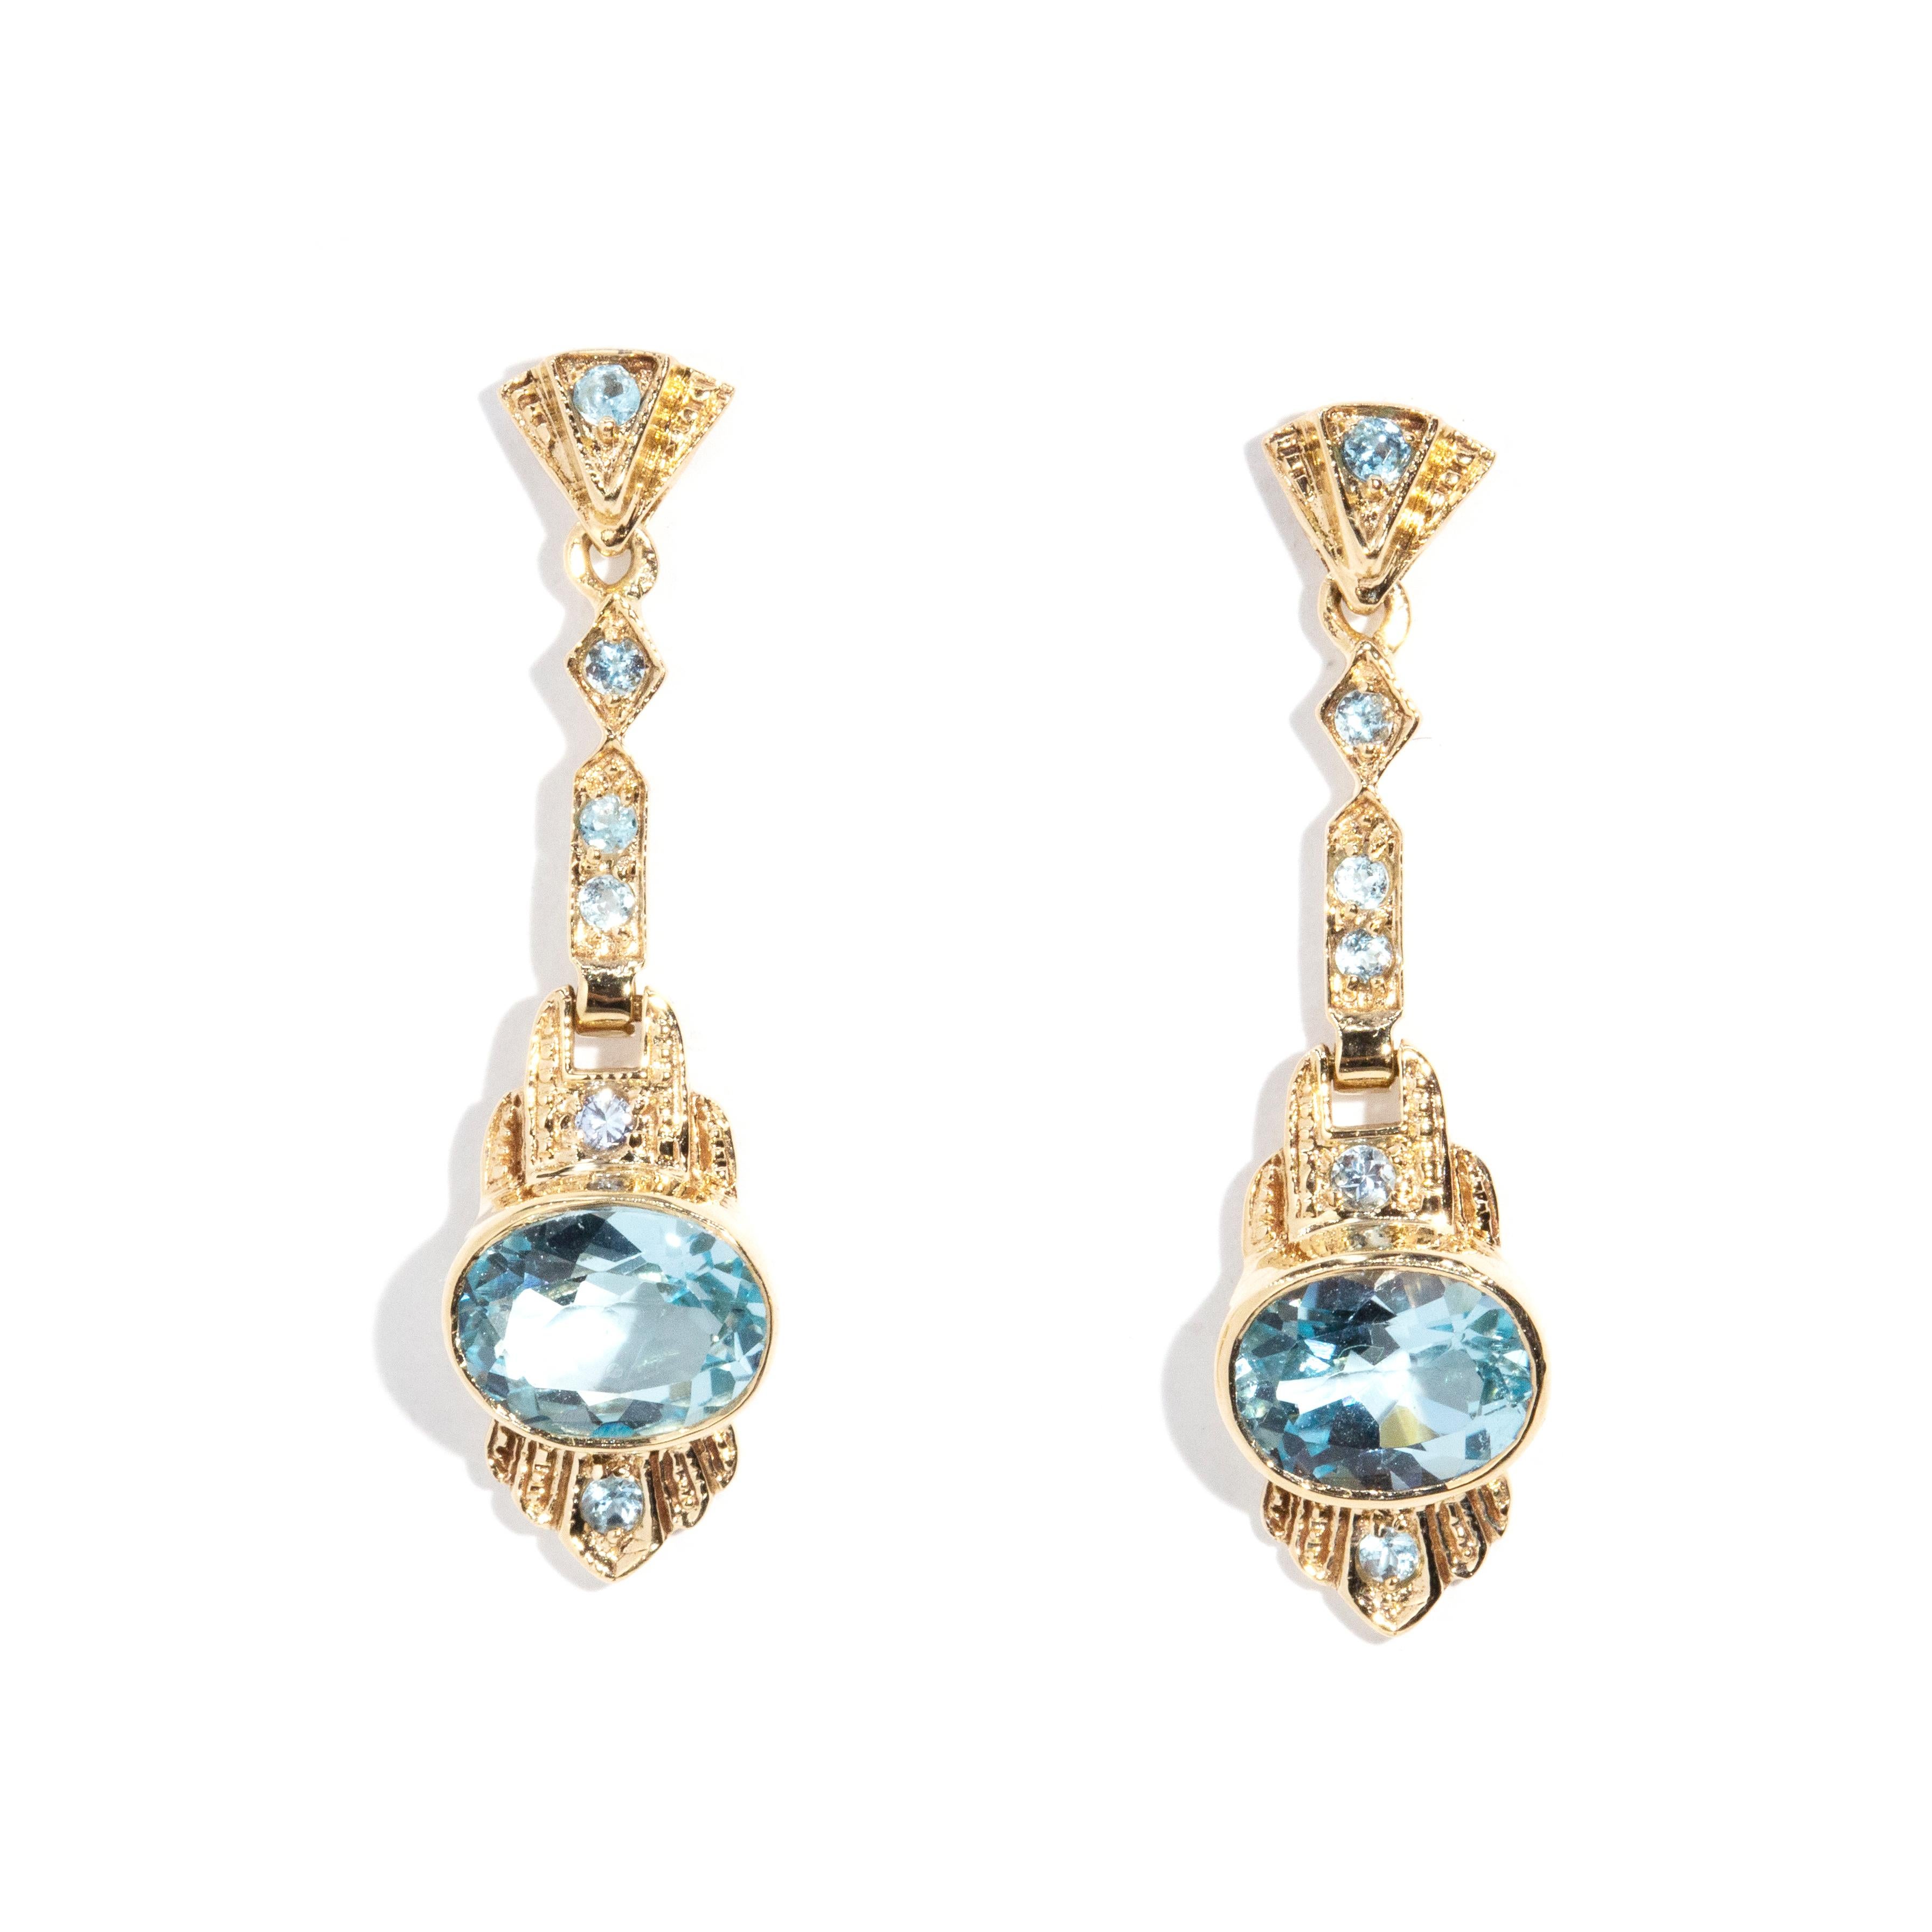 Contemporary Vintage Inspired Bright Blue Topaz Art Deco Style Drop Earrings 9 Carat Gold For Sale